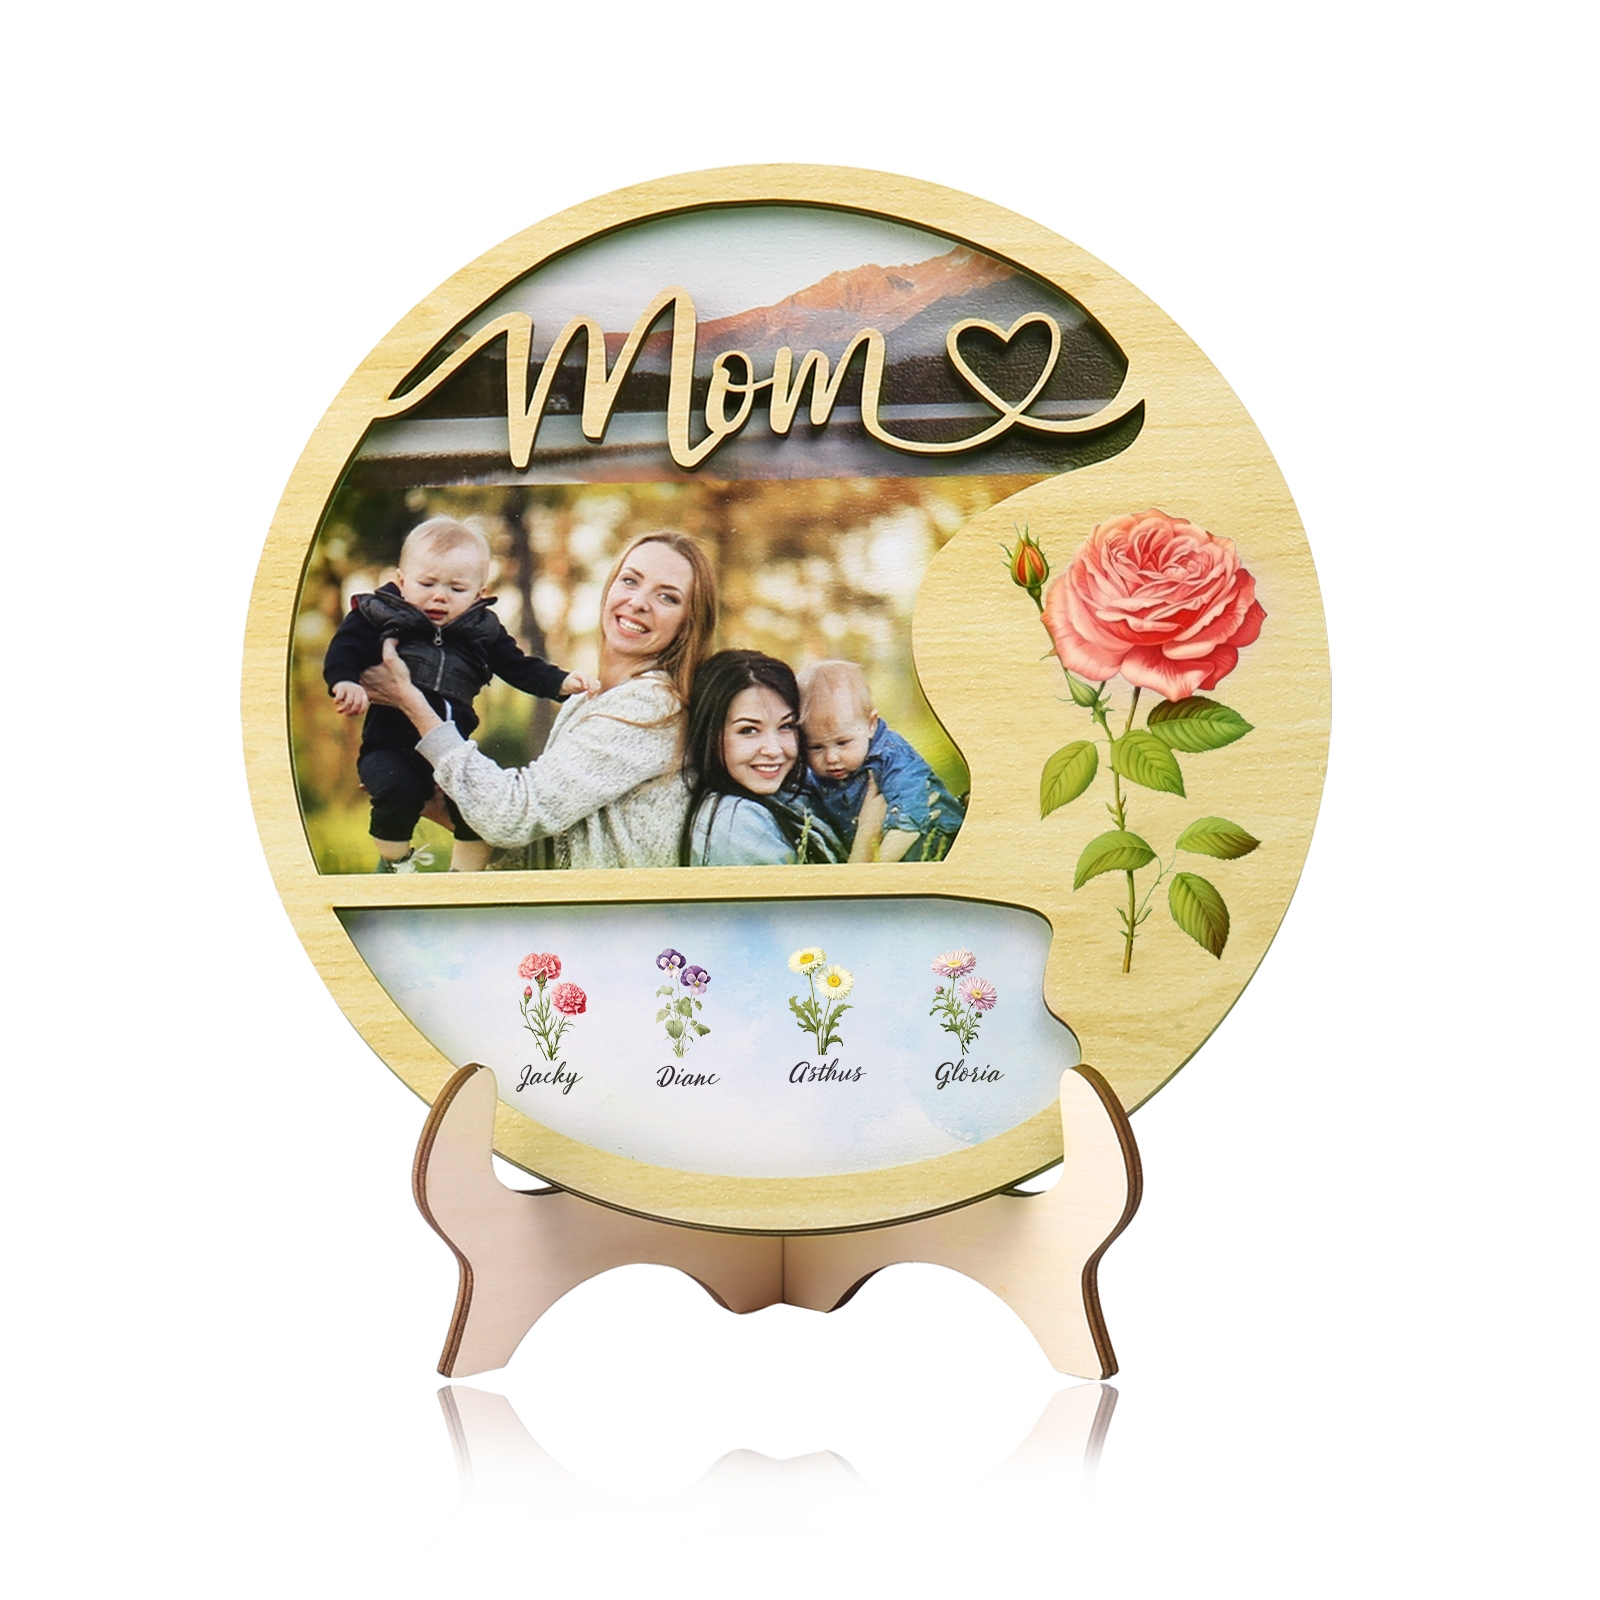 4 Names - Customized Photo Birth Flower Wooden Ornament Decoration for Mom